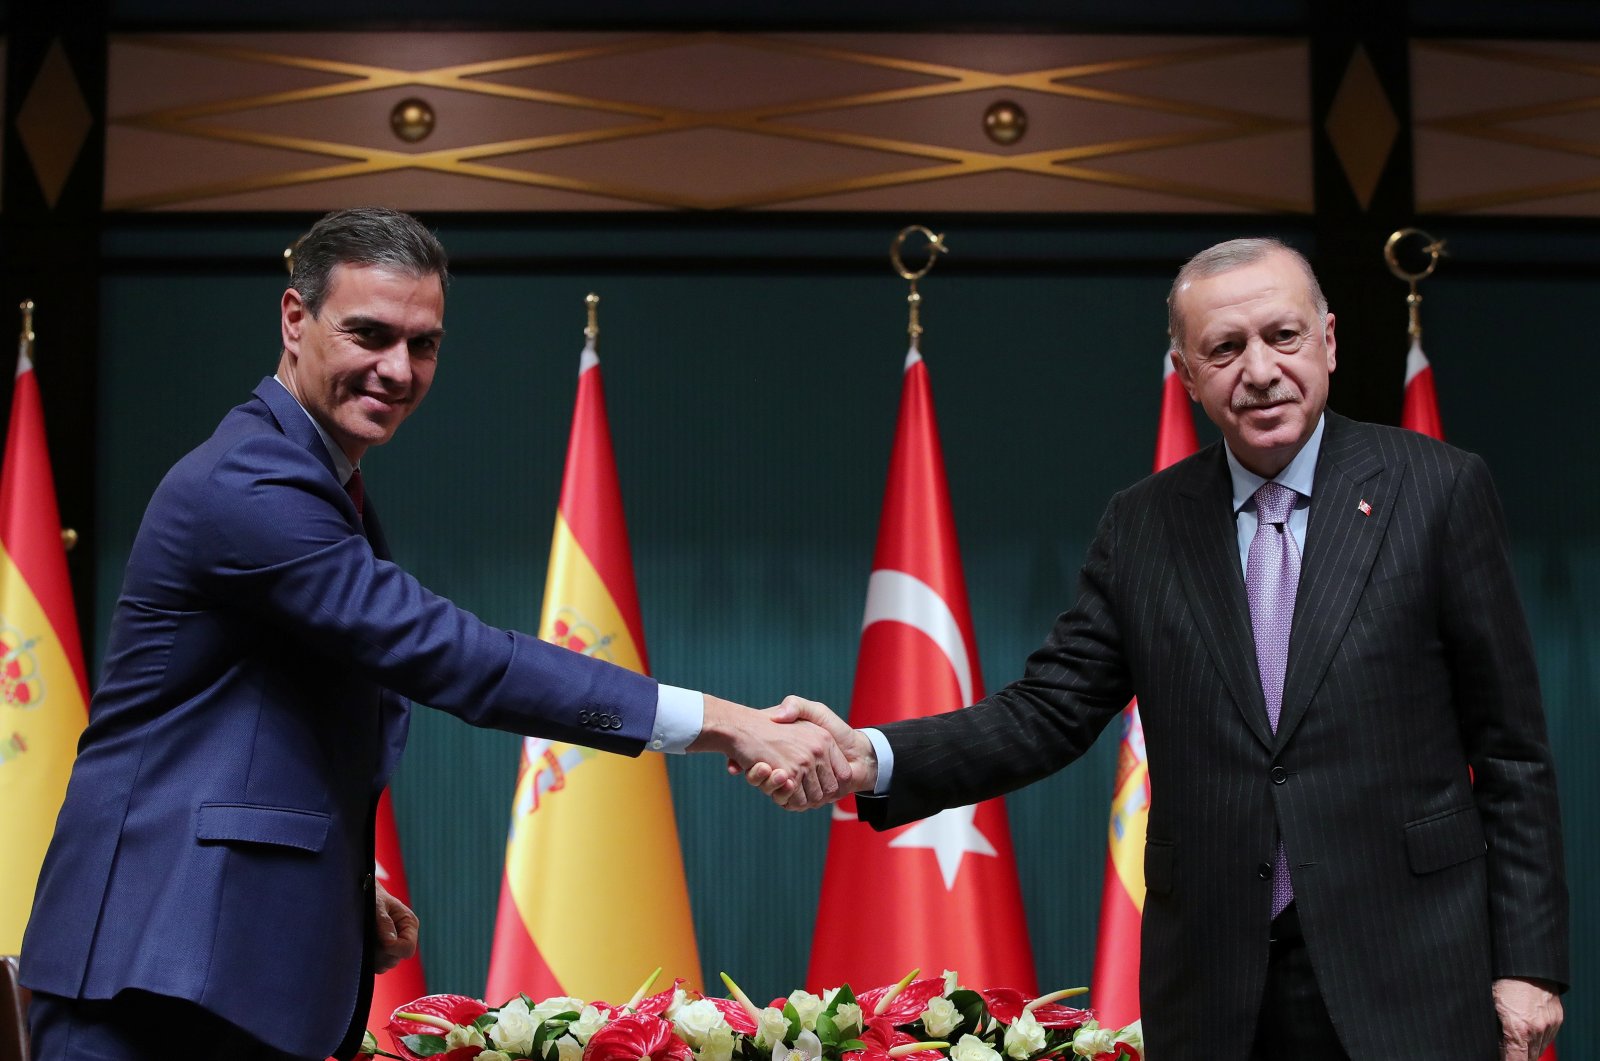 President Recep Tayyip Erdoğan (R) and Spain&#039;s Prime Minister Pedro Sanchez shake hands during a news conference in the capital Ankara, Turkey, Nov. 17, 2021. (Reuters Photo)